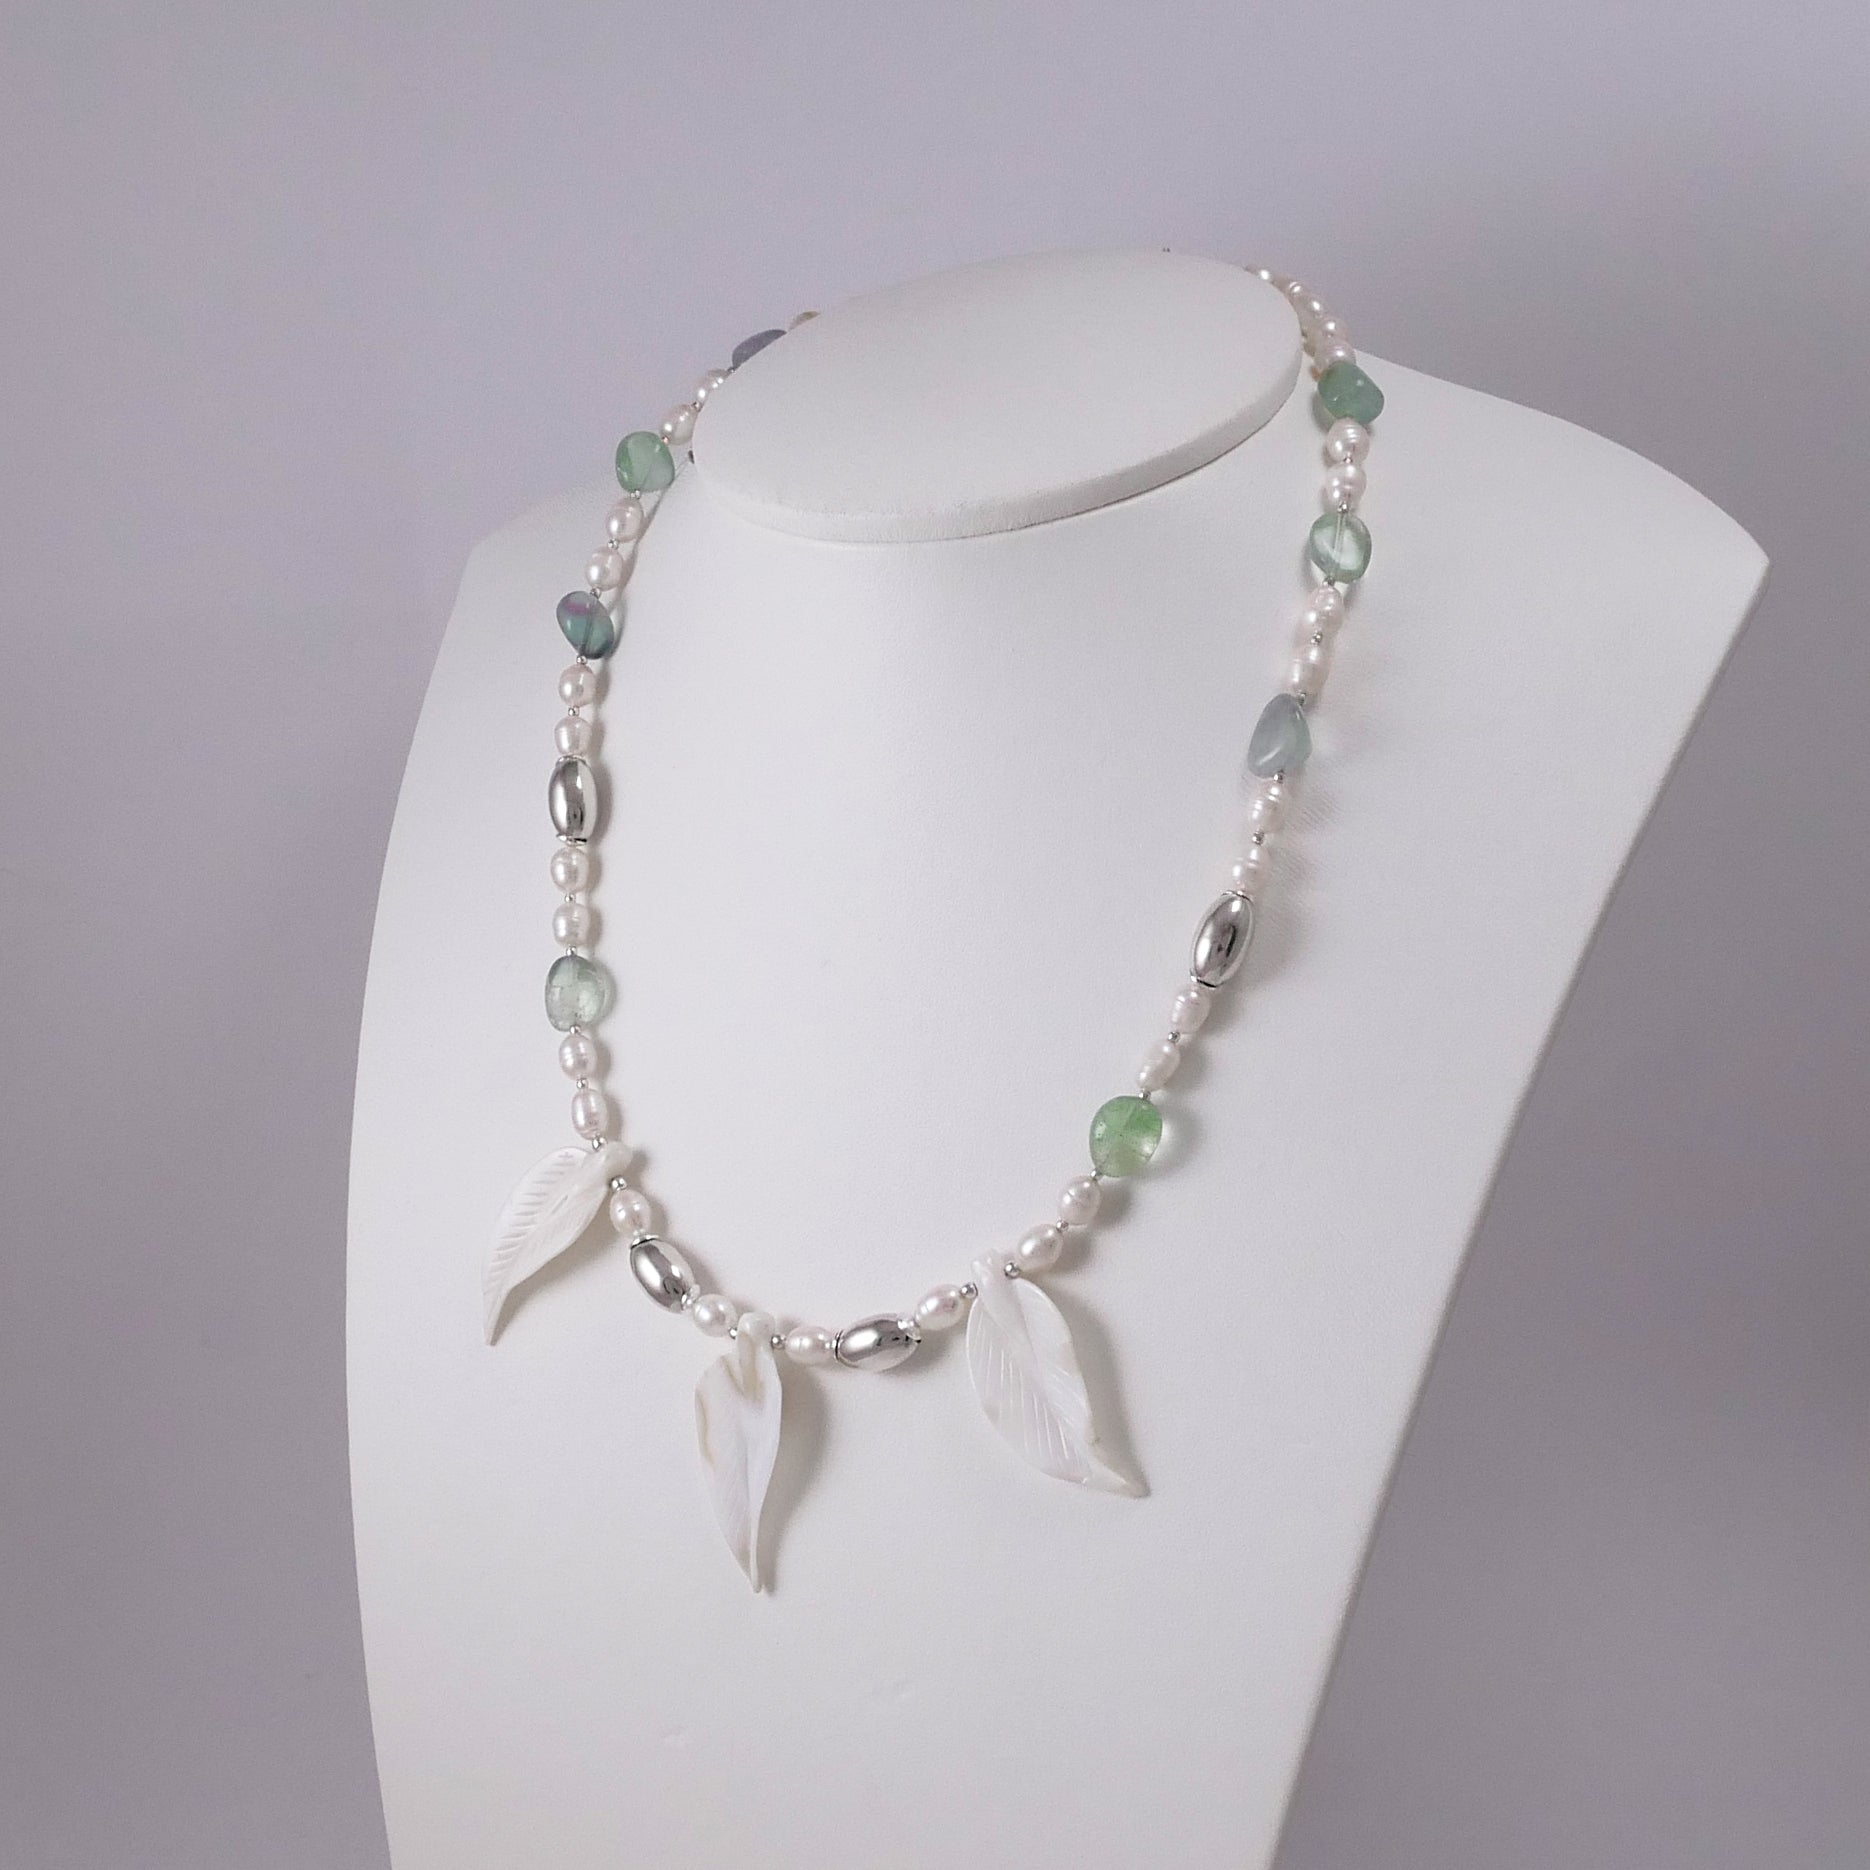 Pearls, Fluorites, Mother of Pearl Leaves, and Sterling Silver Necklace - Katerina Roukouna